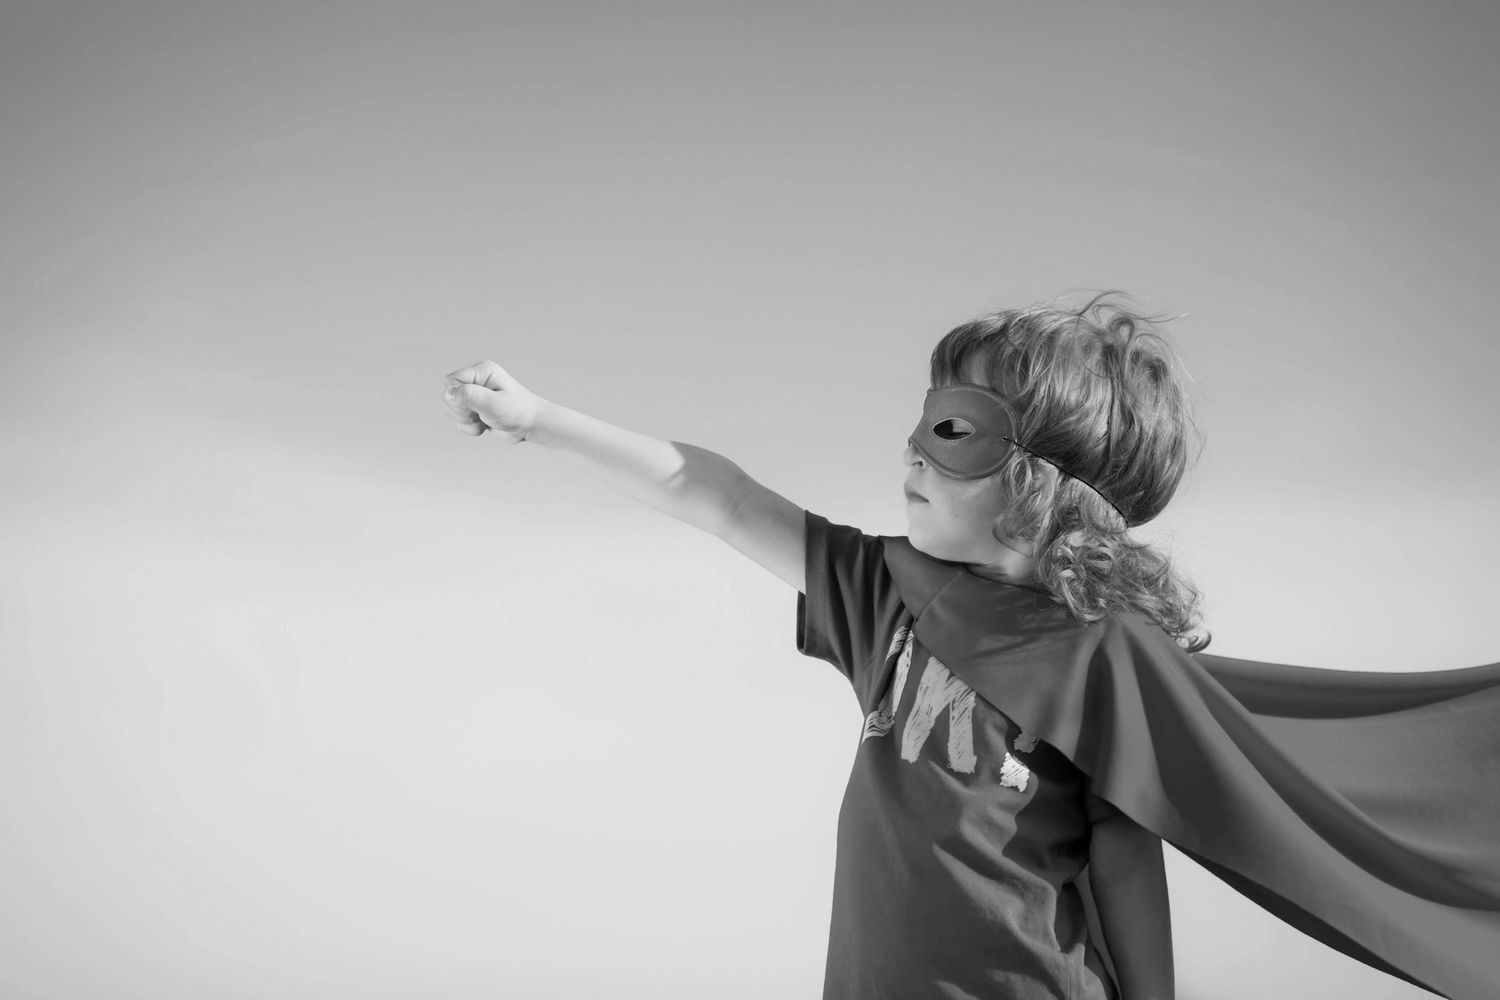 A young superhero putting his fist in the air. 